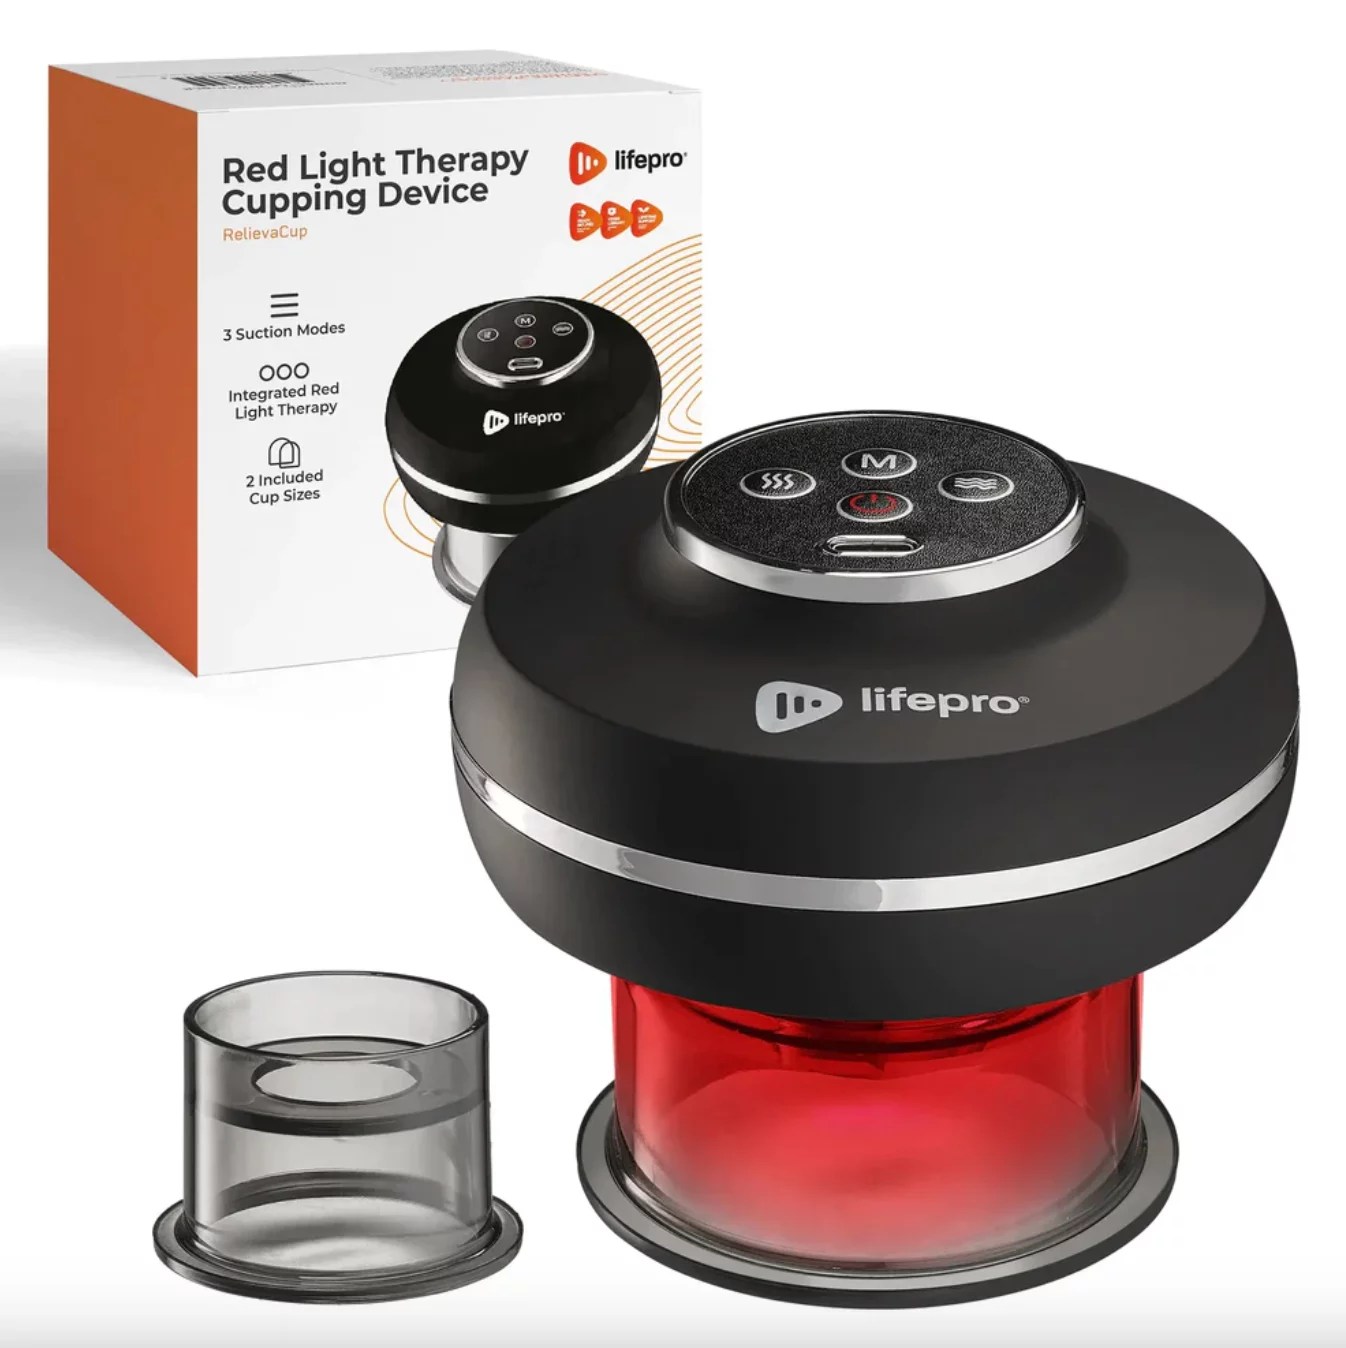 An electric cupping device with a black top and glowing red base, plus the product box.